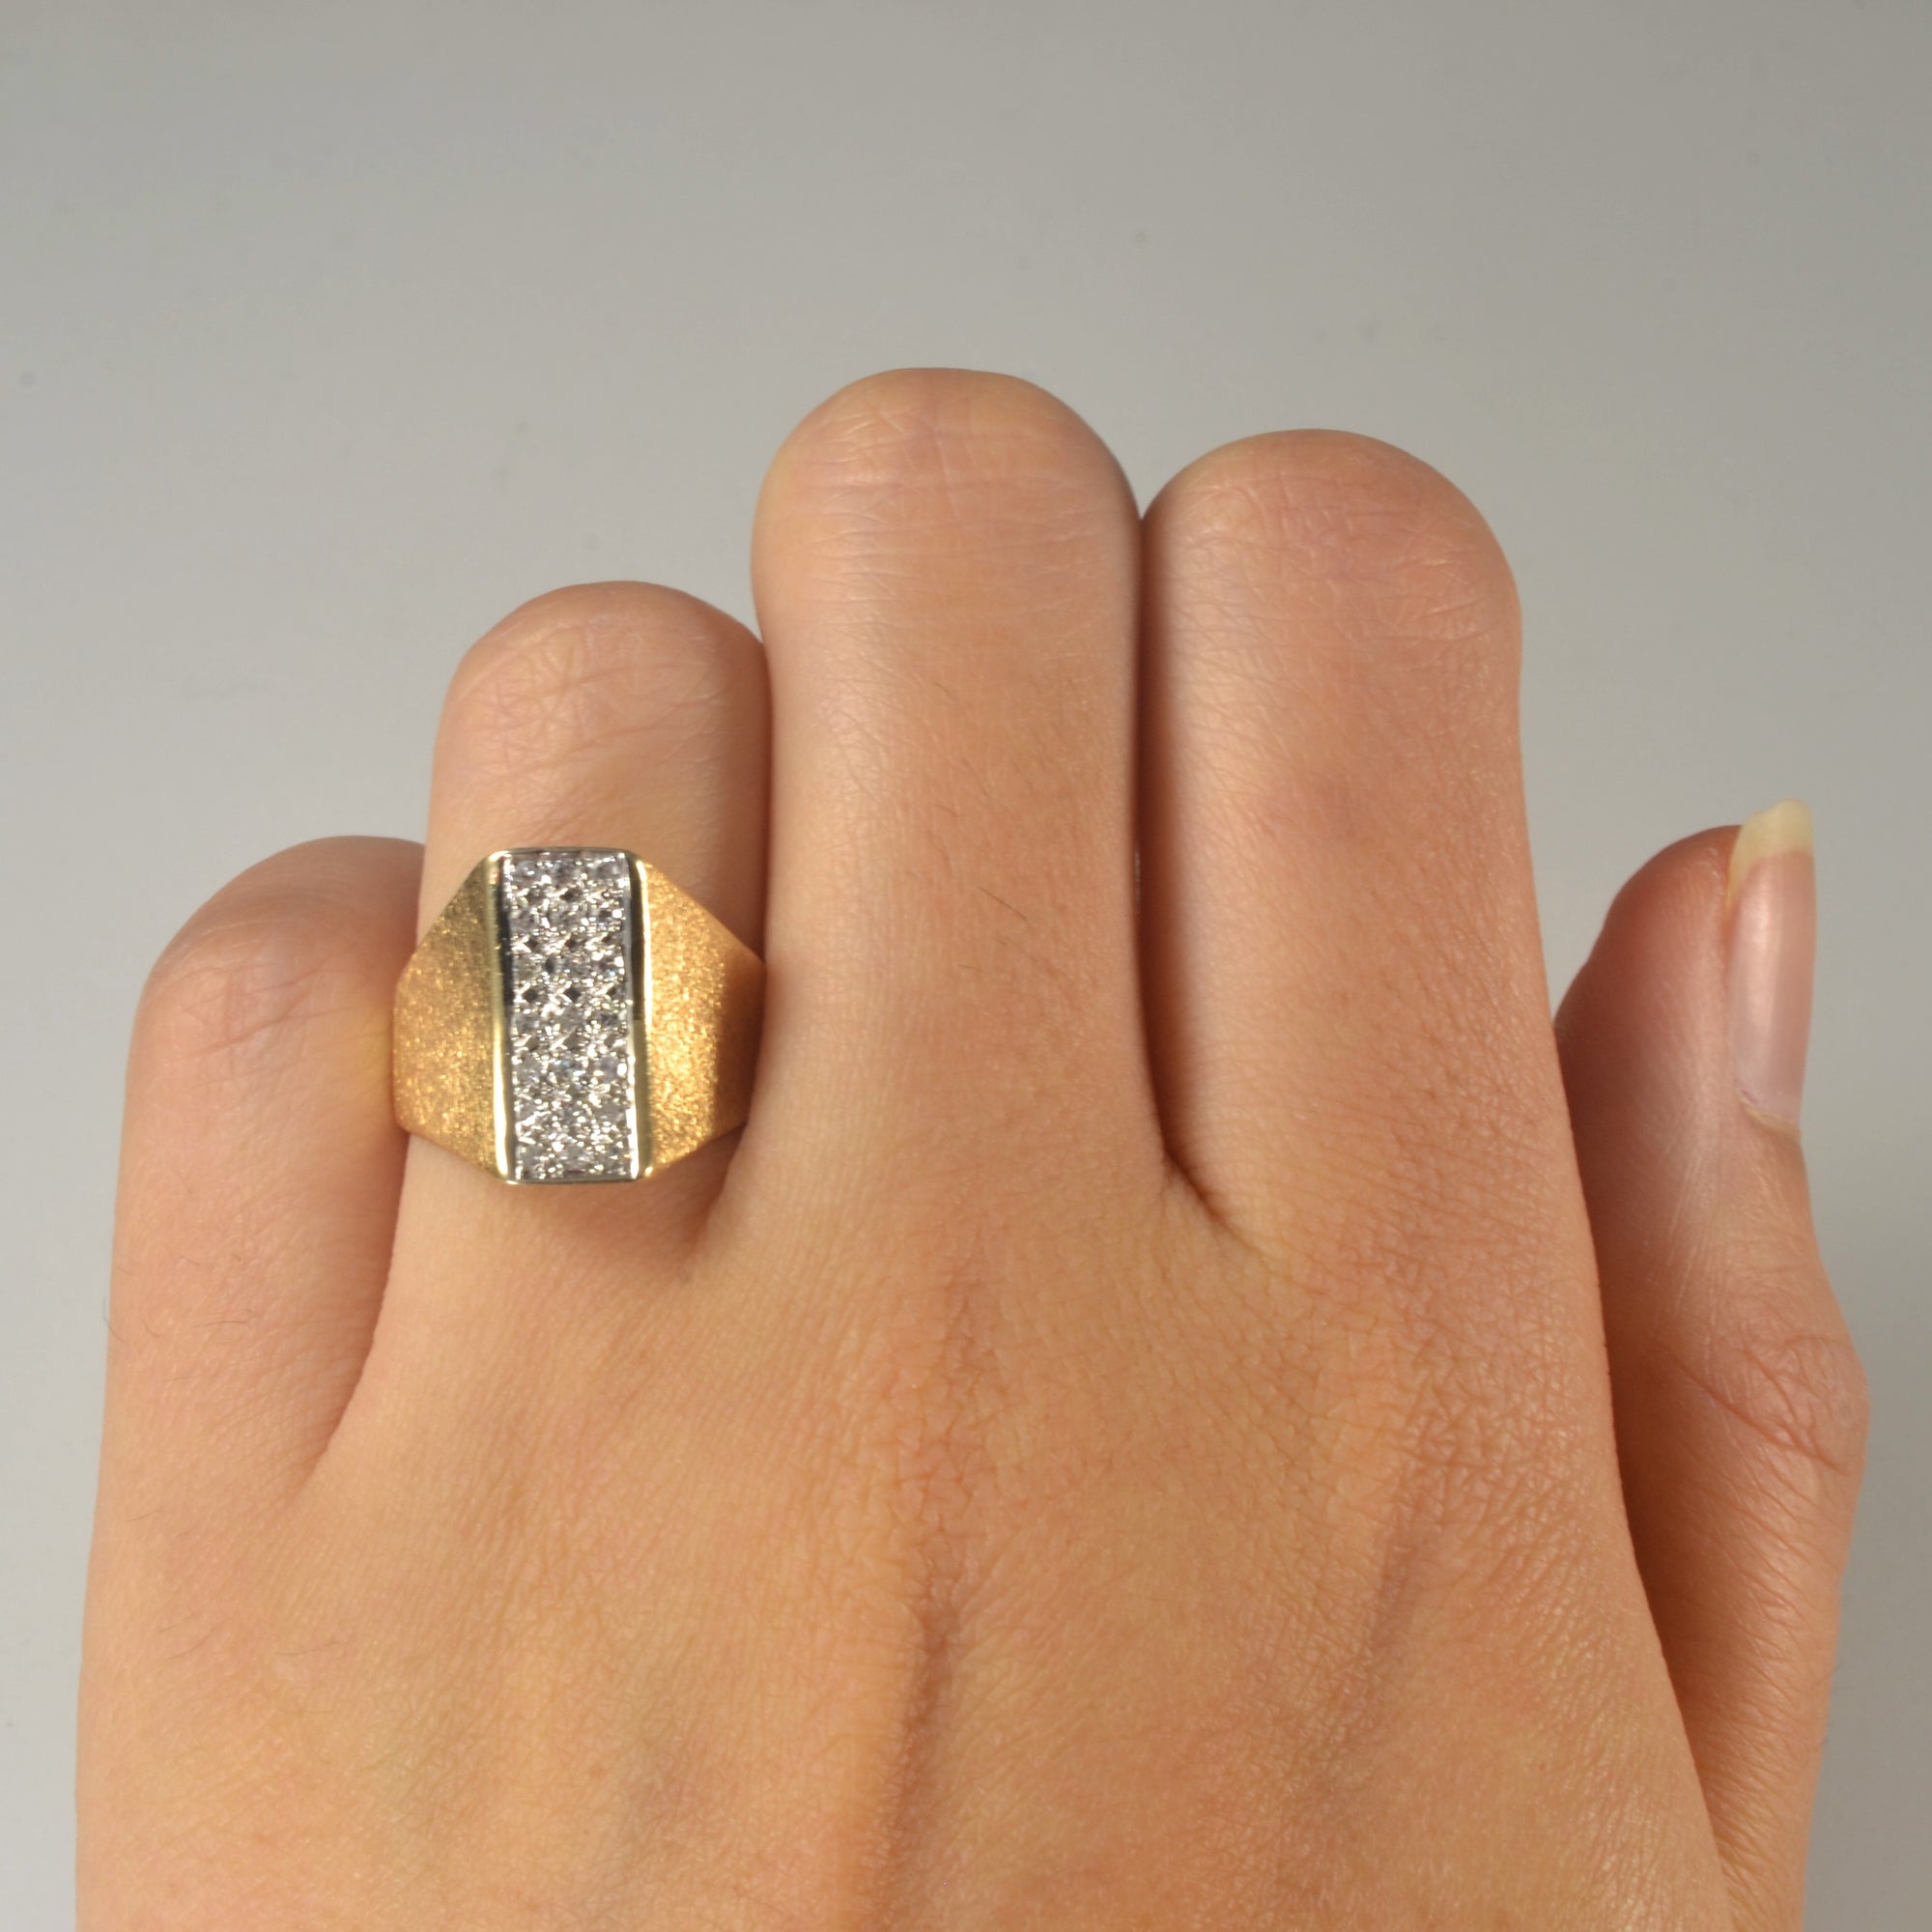 Tapered Pave Cluster Diamond Ring | 0.21ctw | SZ 5.75 |